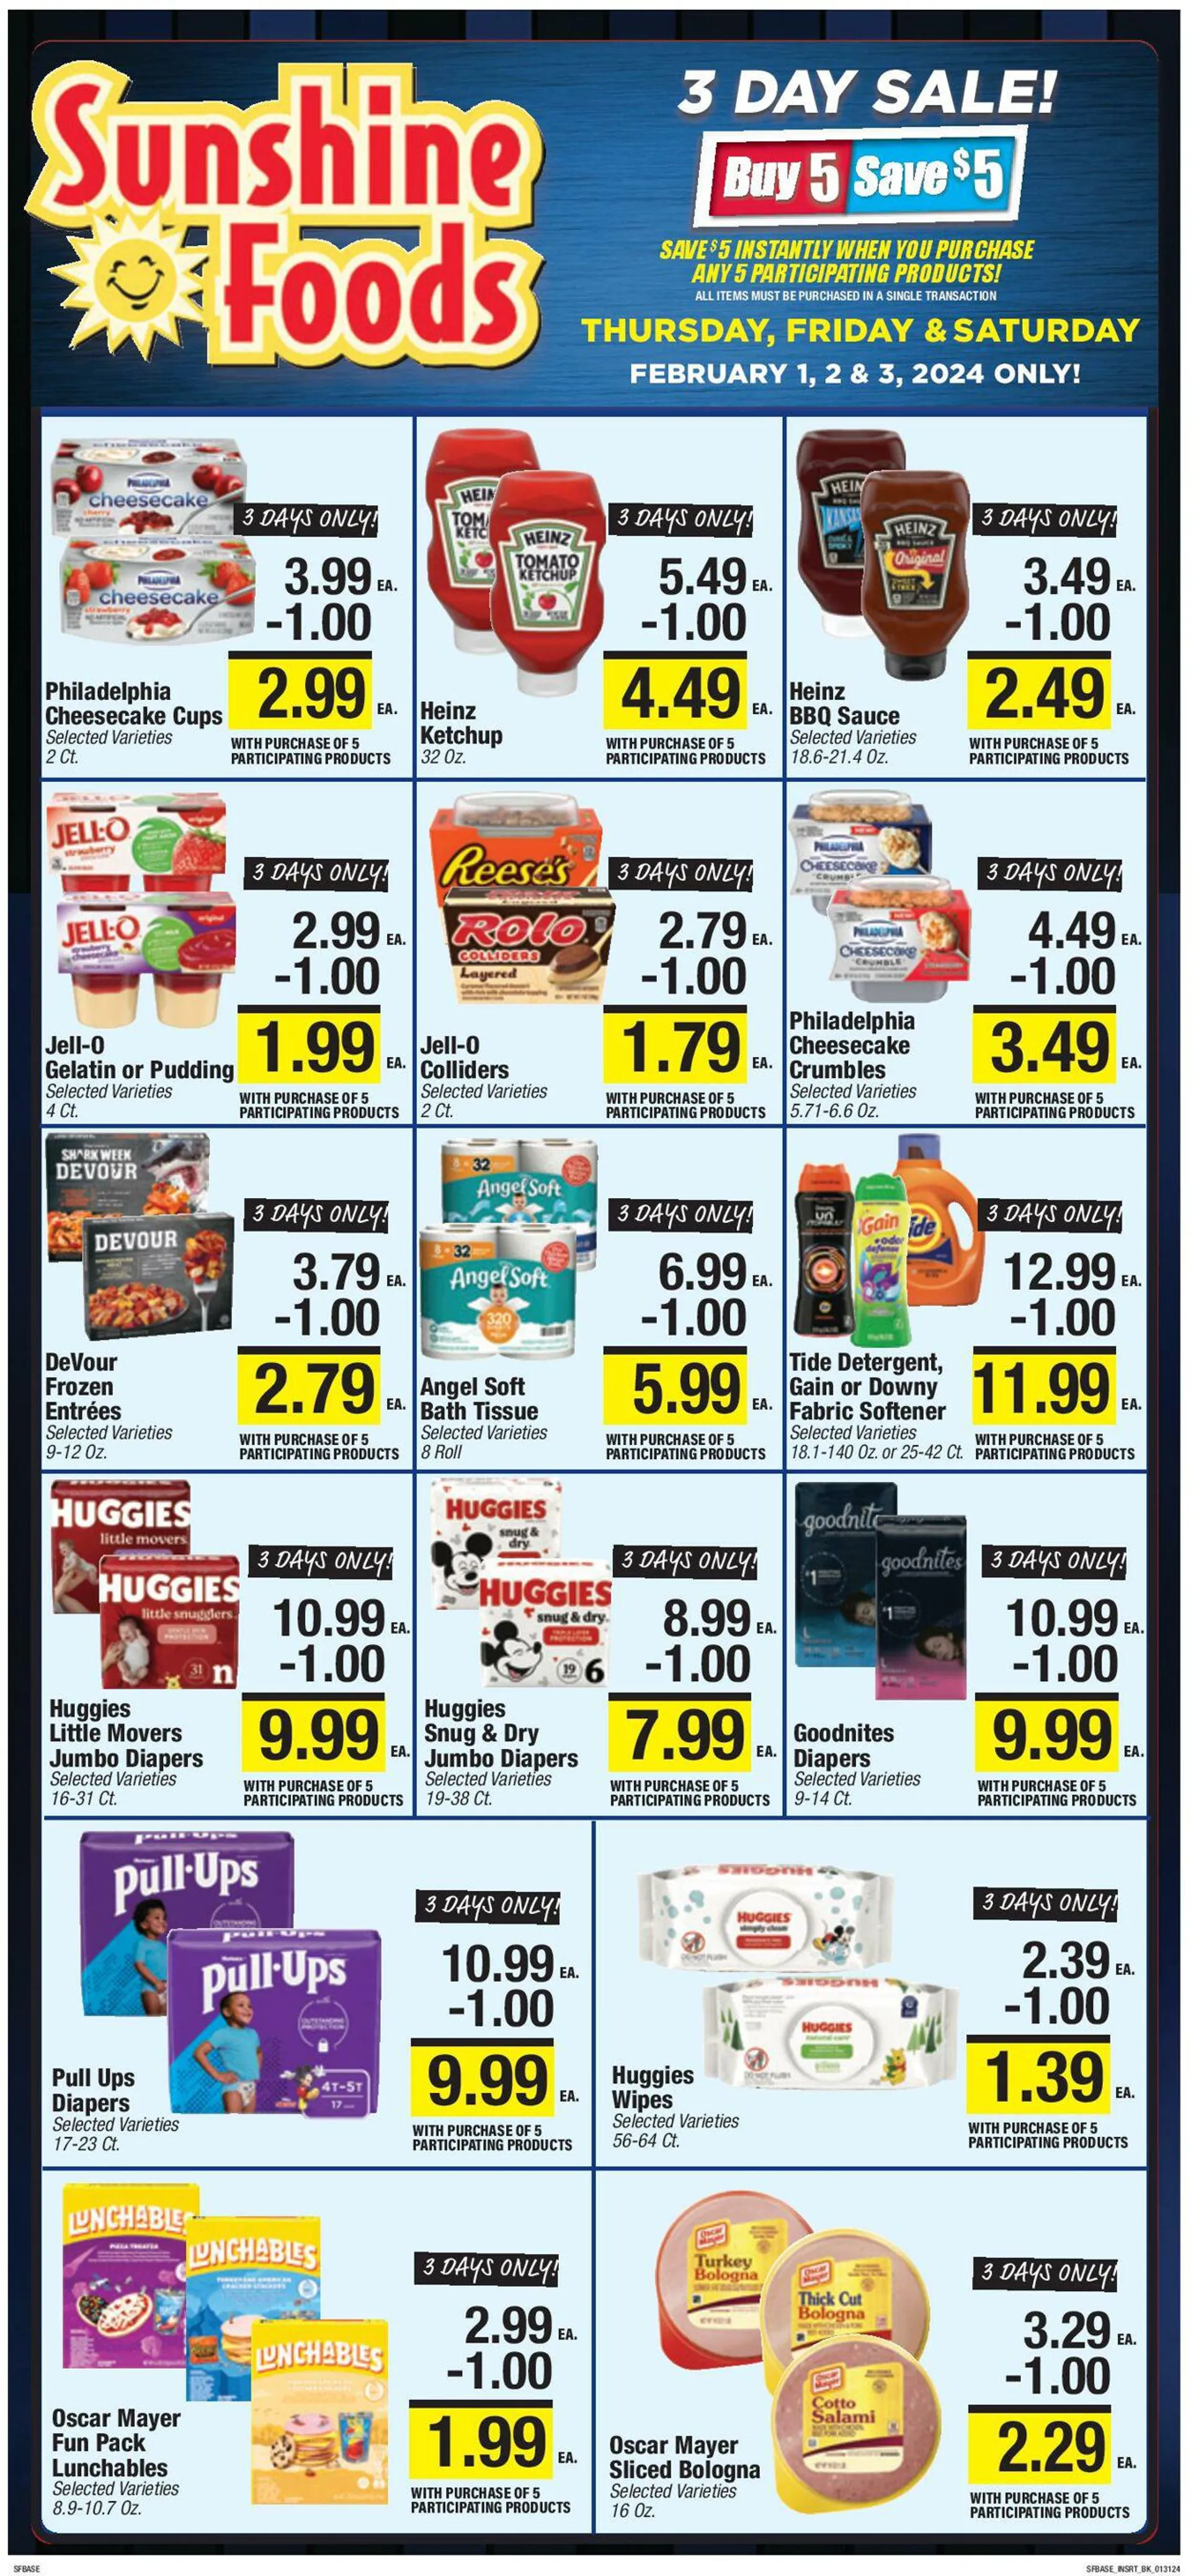 Weekly ad Sunshine Foods from January 31 to February 6 2024 - Page 10